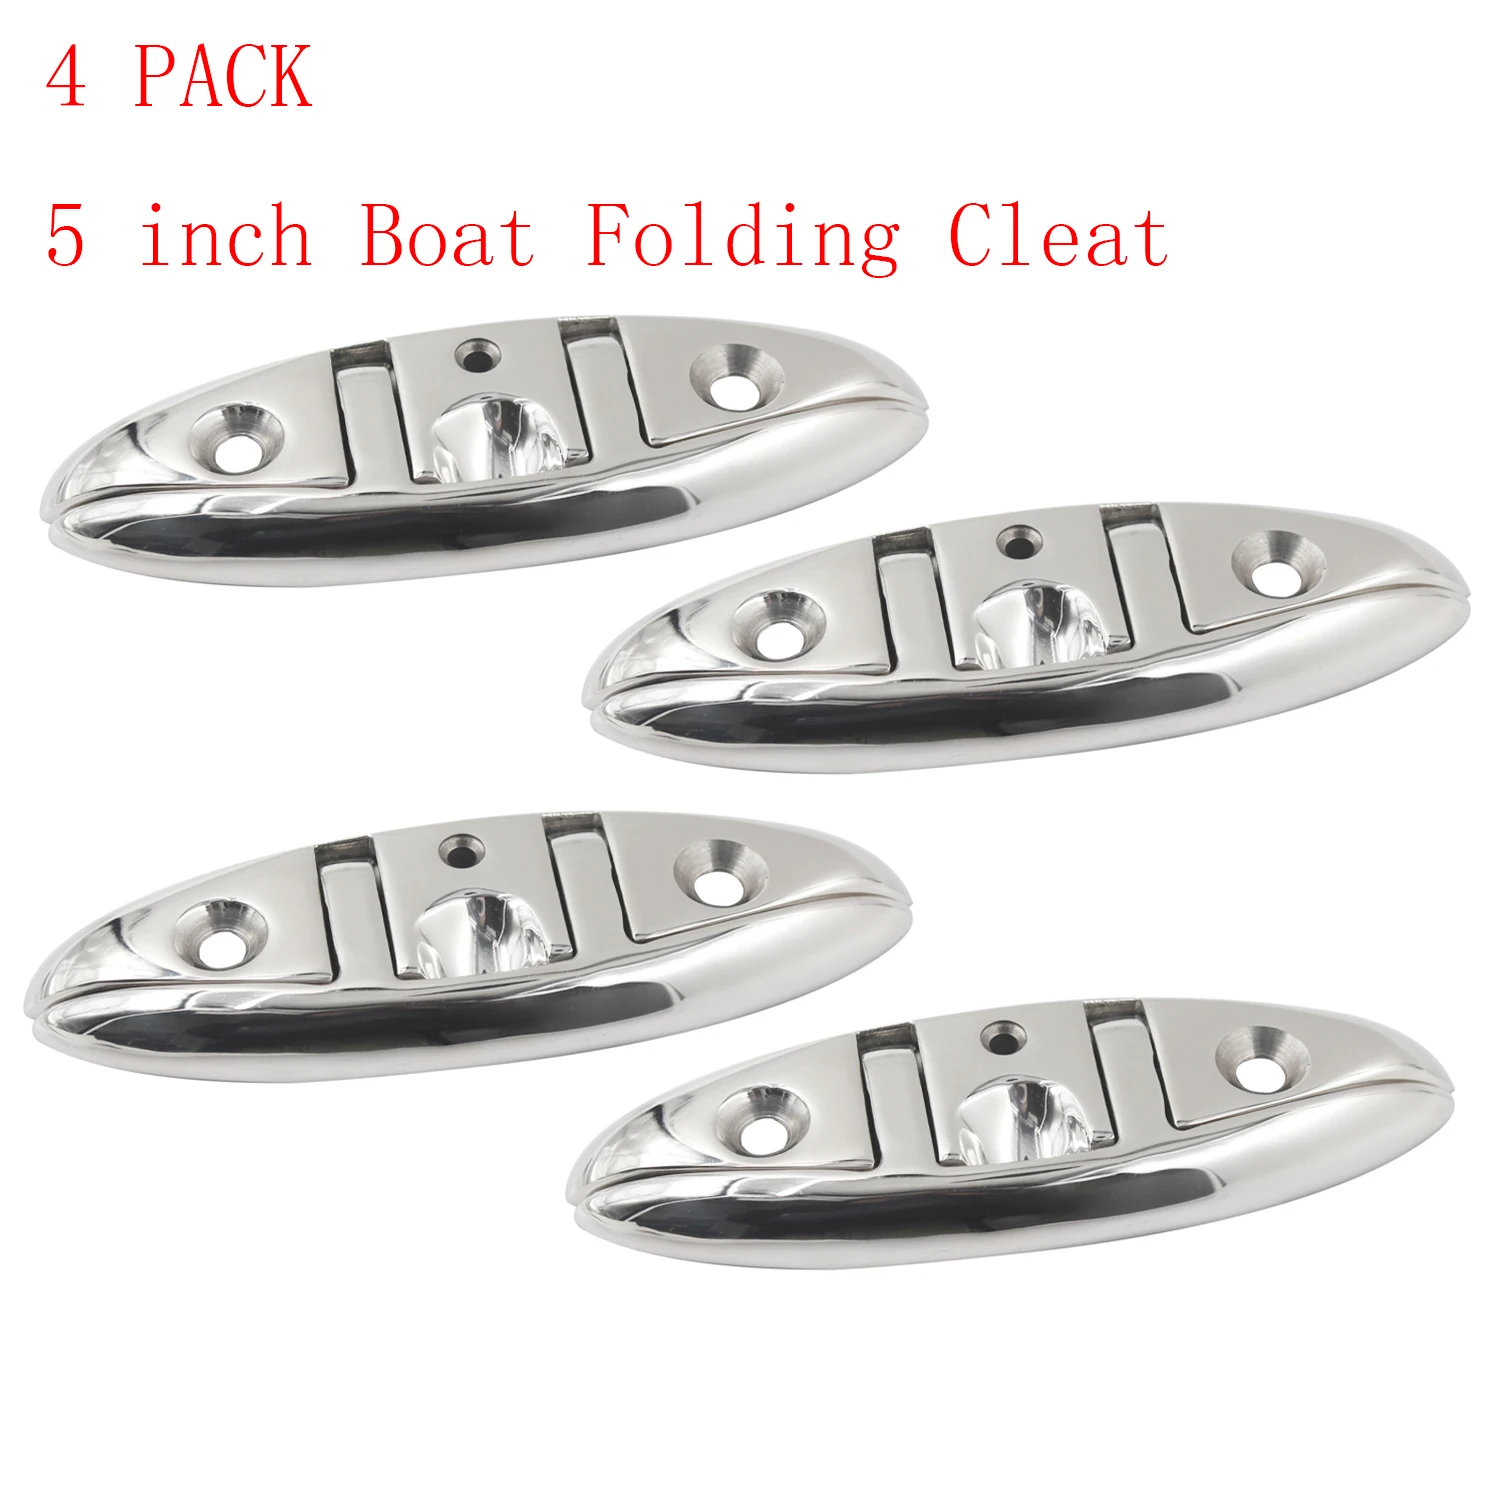 4 Pcs 5 Inch Boat Folding Cleat Deck Flip Up Flush Dock Mount Cleat Marine Stainless Steel 316 Mooring Rope Cleat